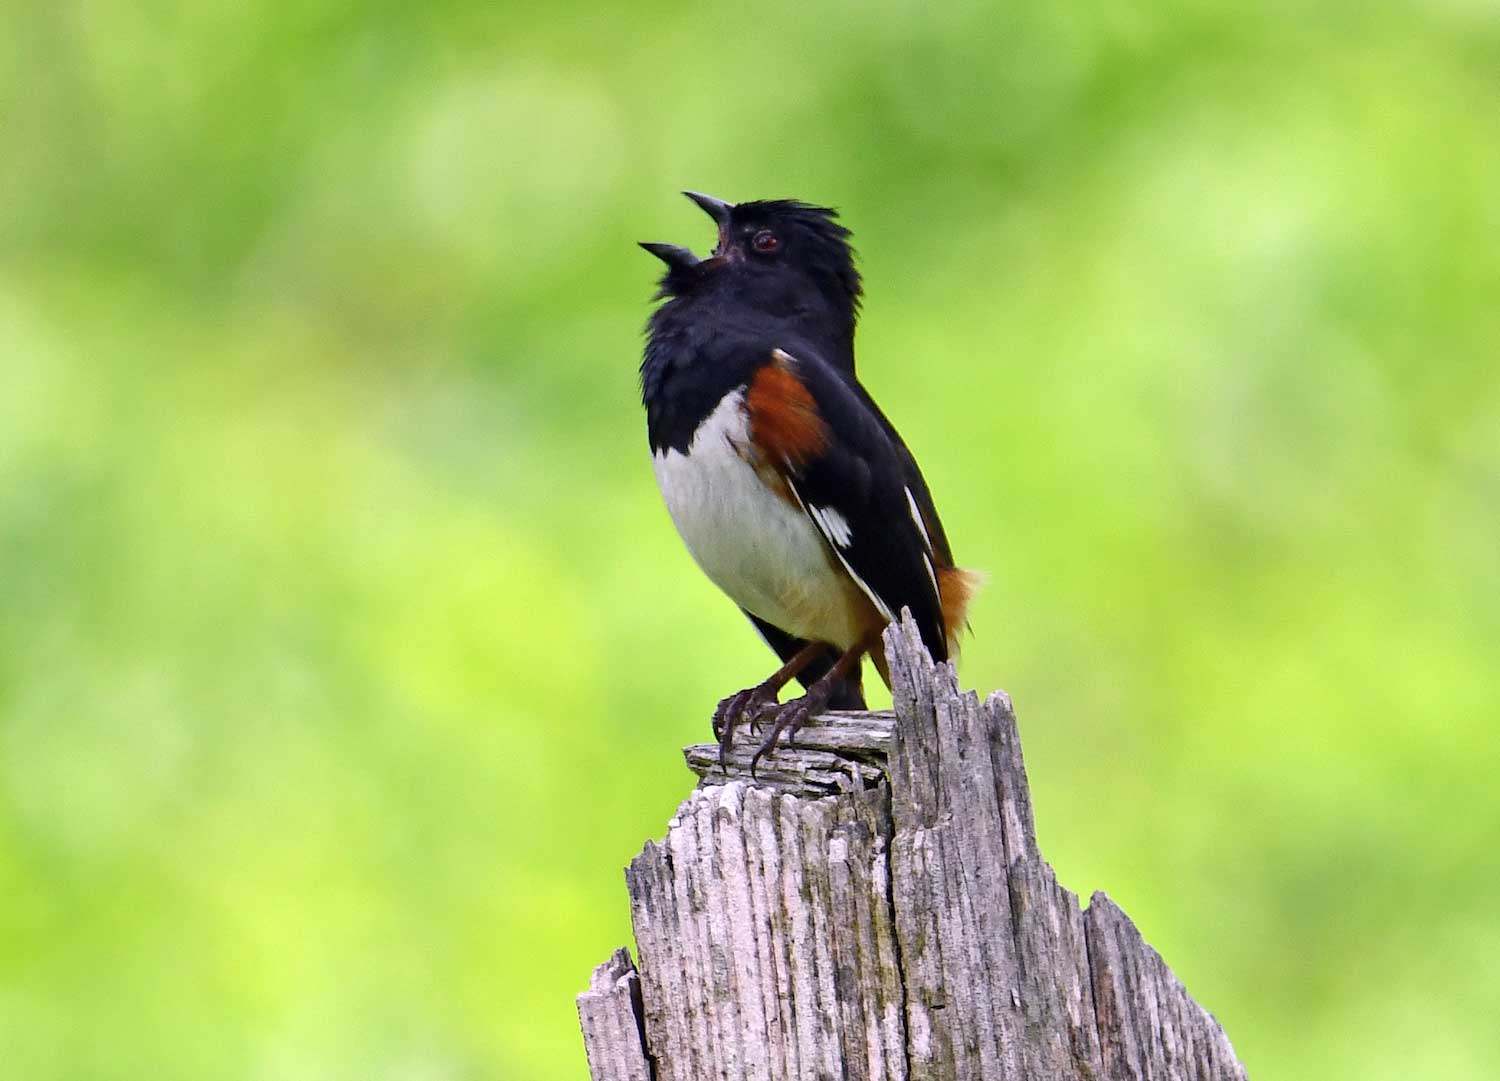 An eastern towhee calling out while perched on a tree snag.